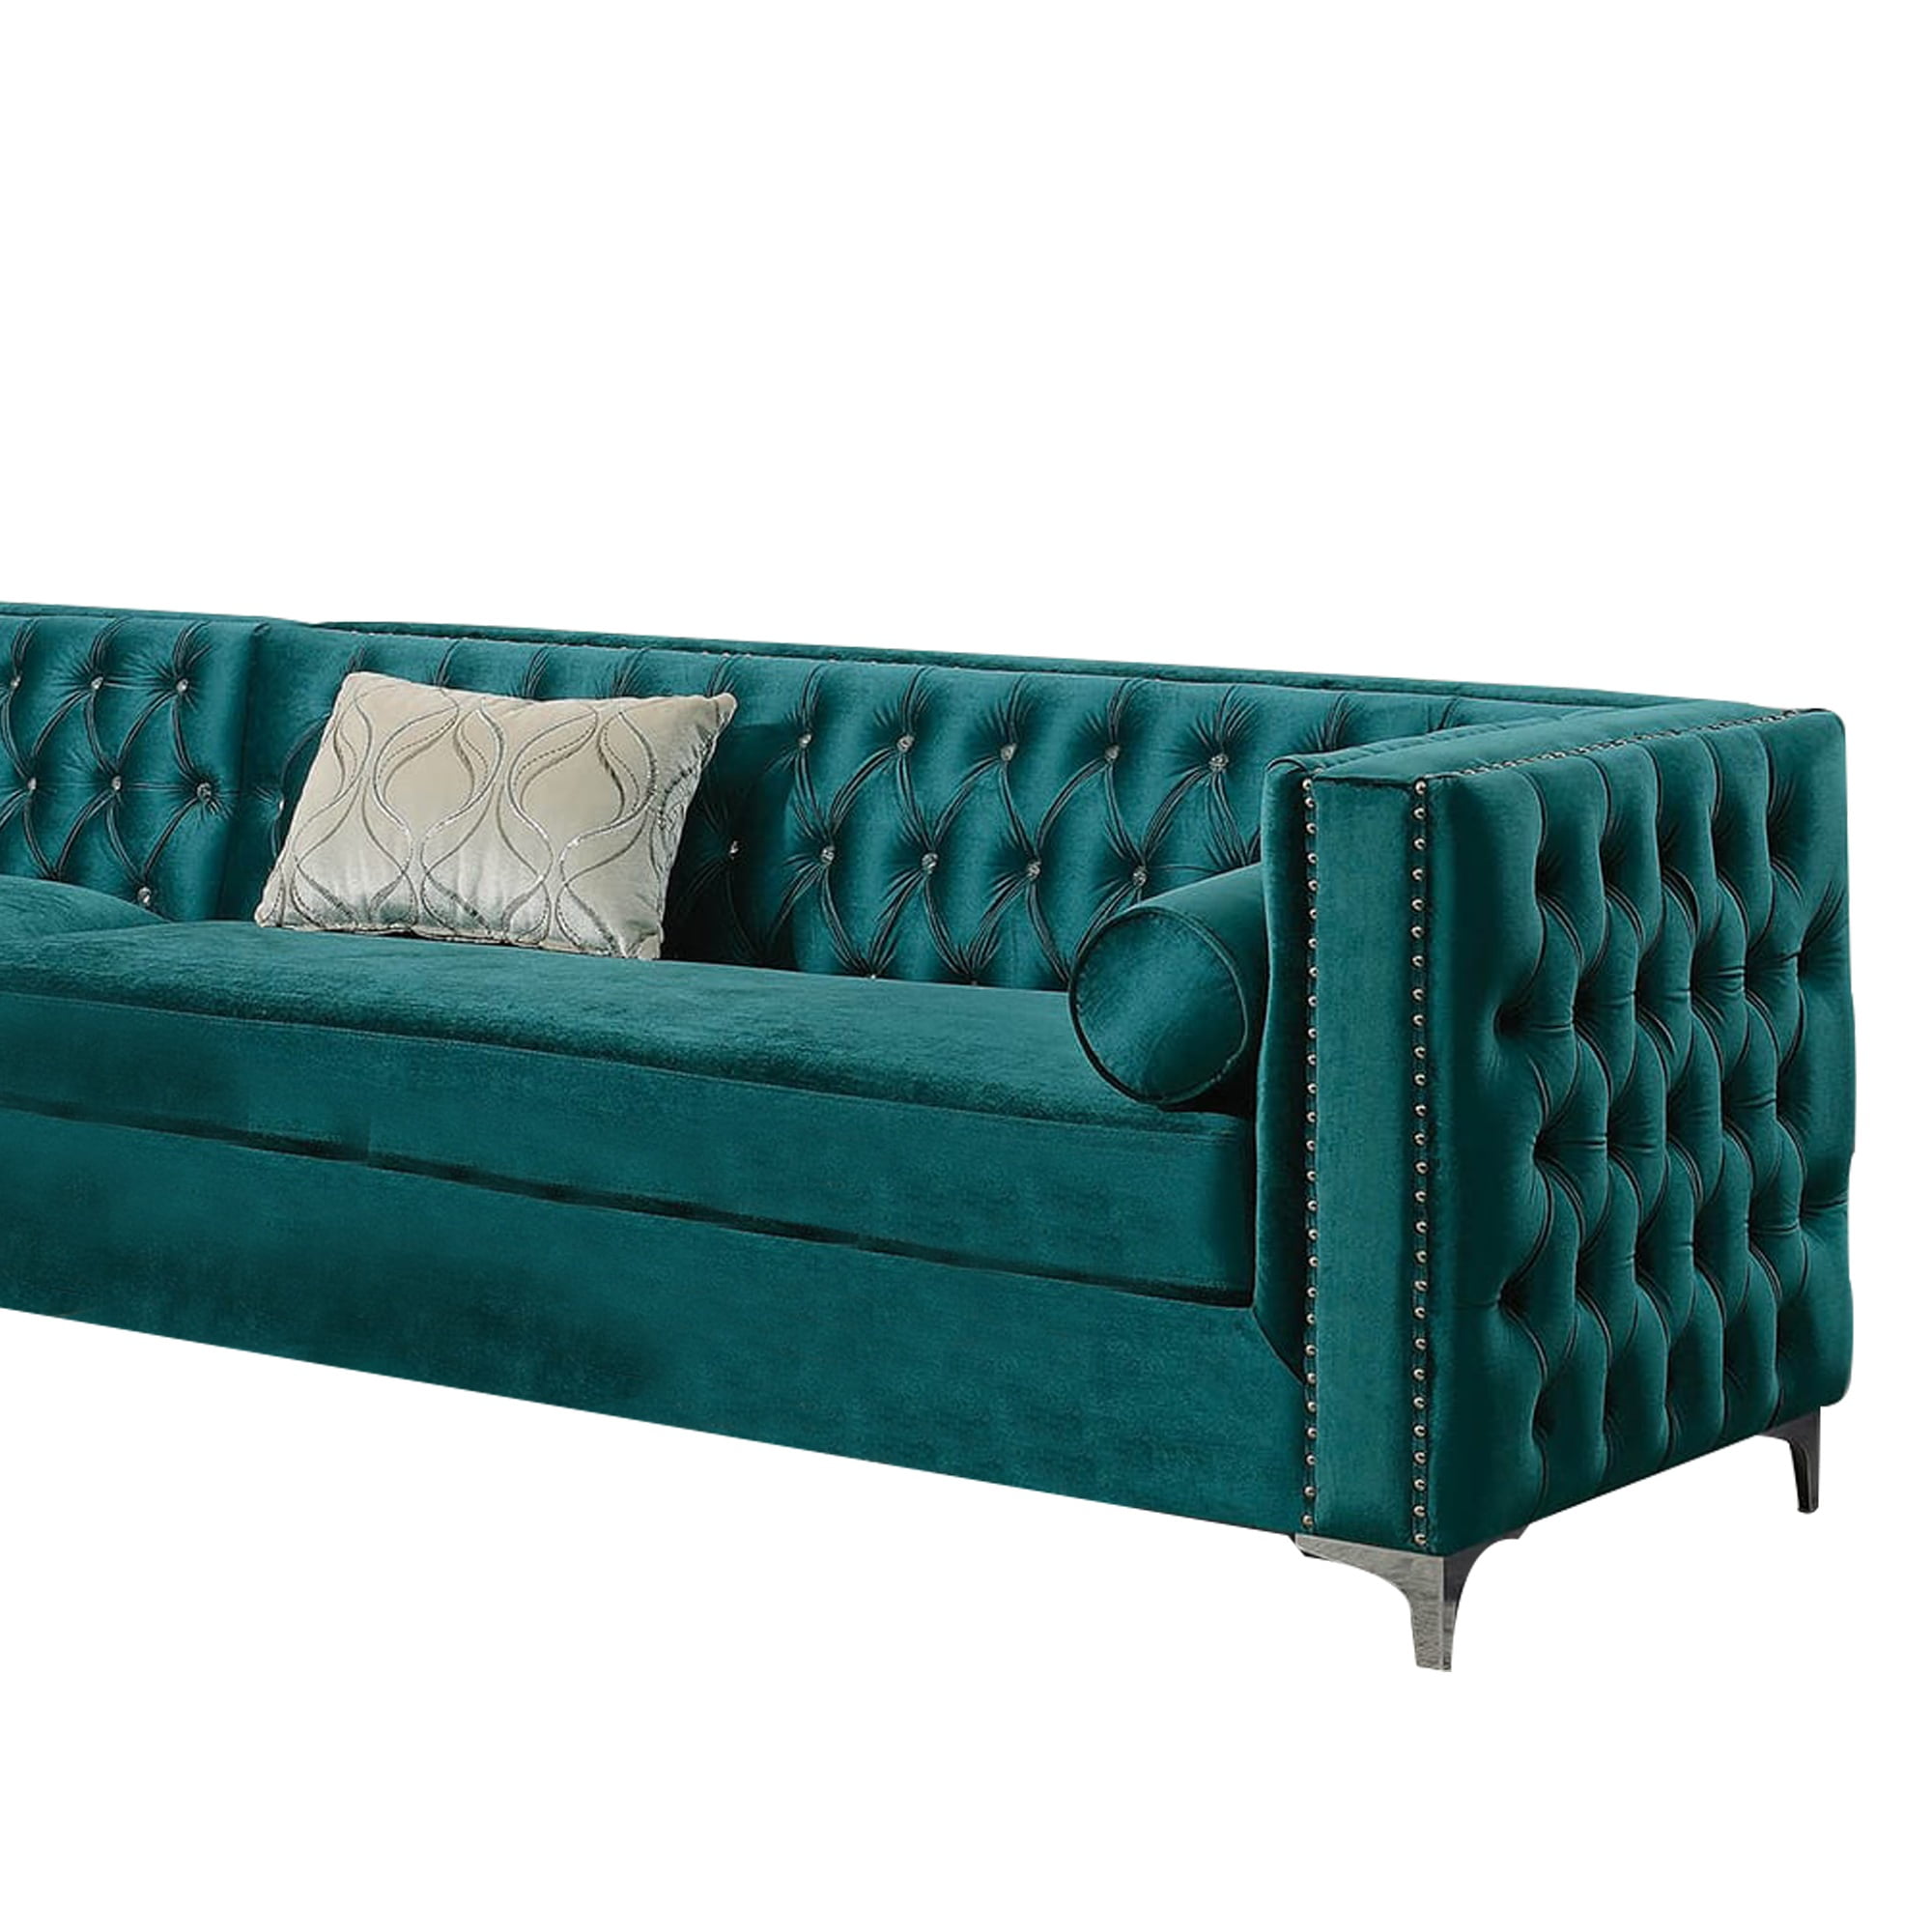 Velvet Upholstered 2 Piece Sectional Sofa with Tufted Details, Teal